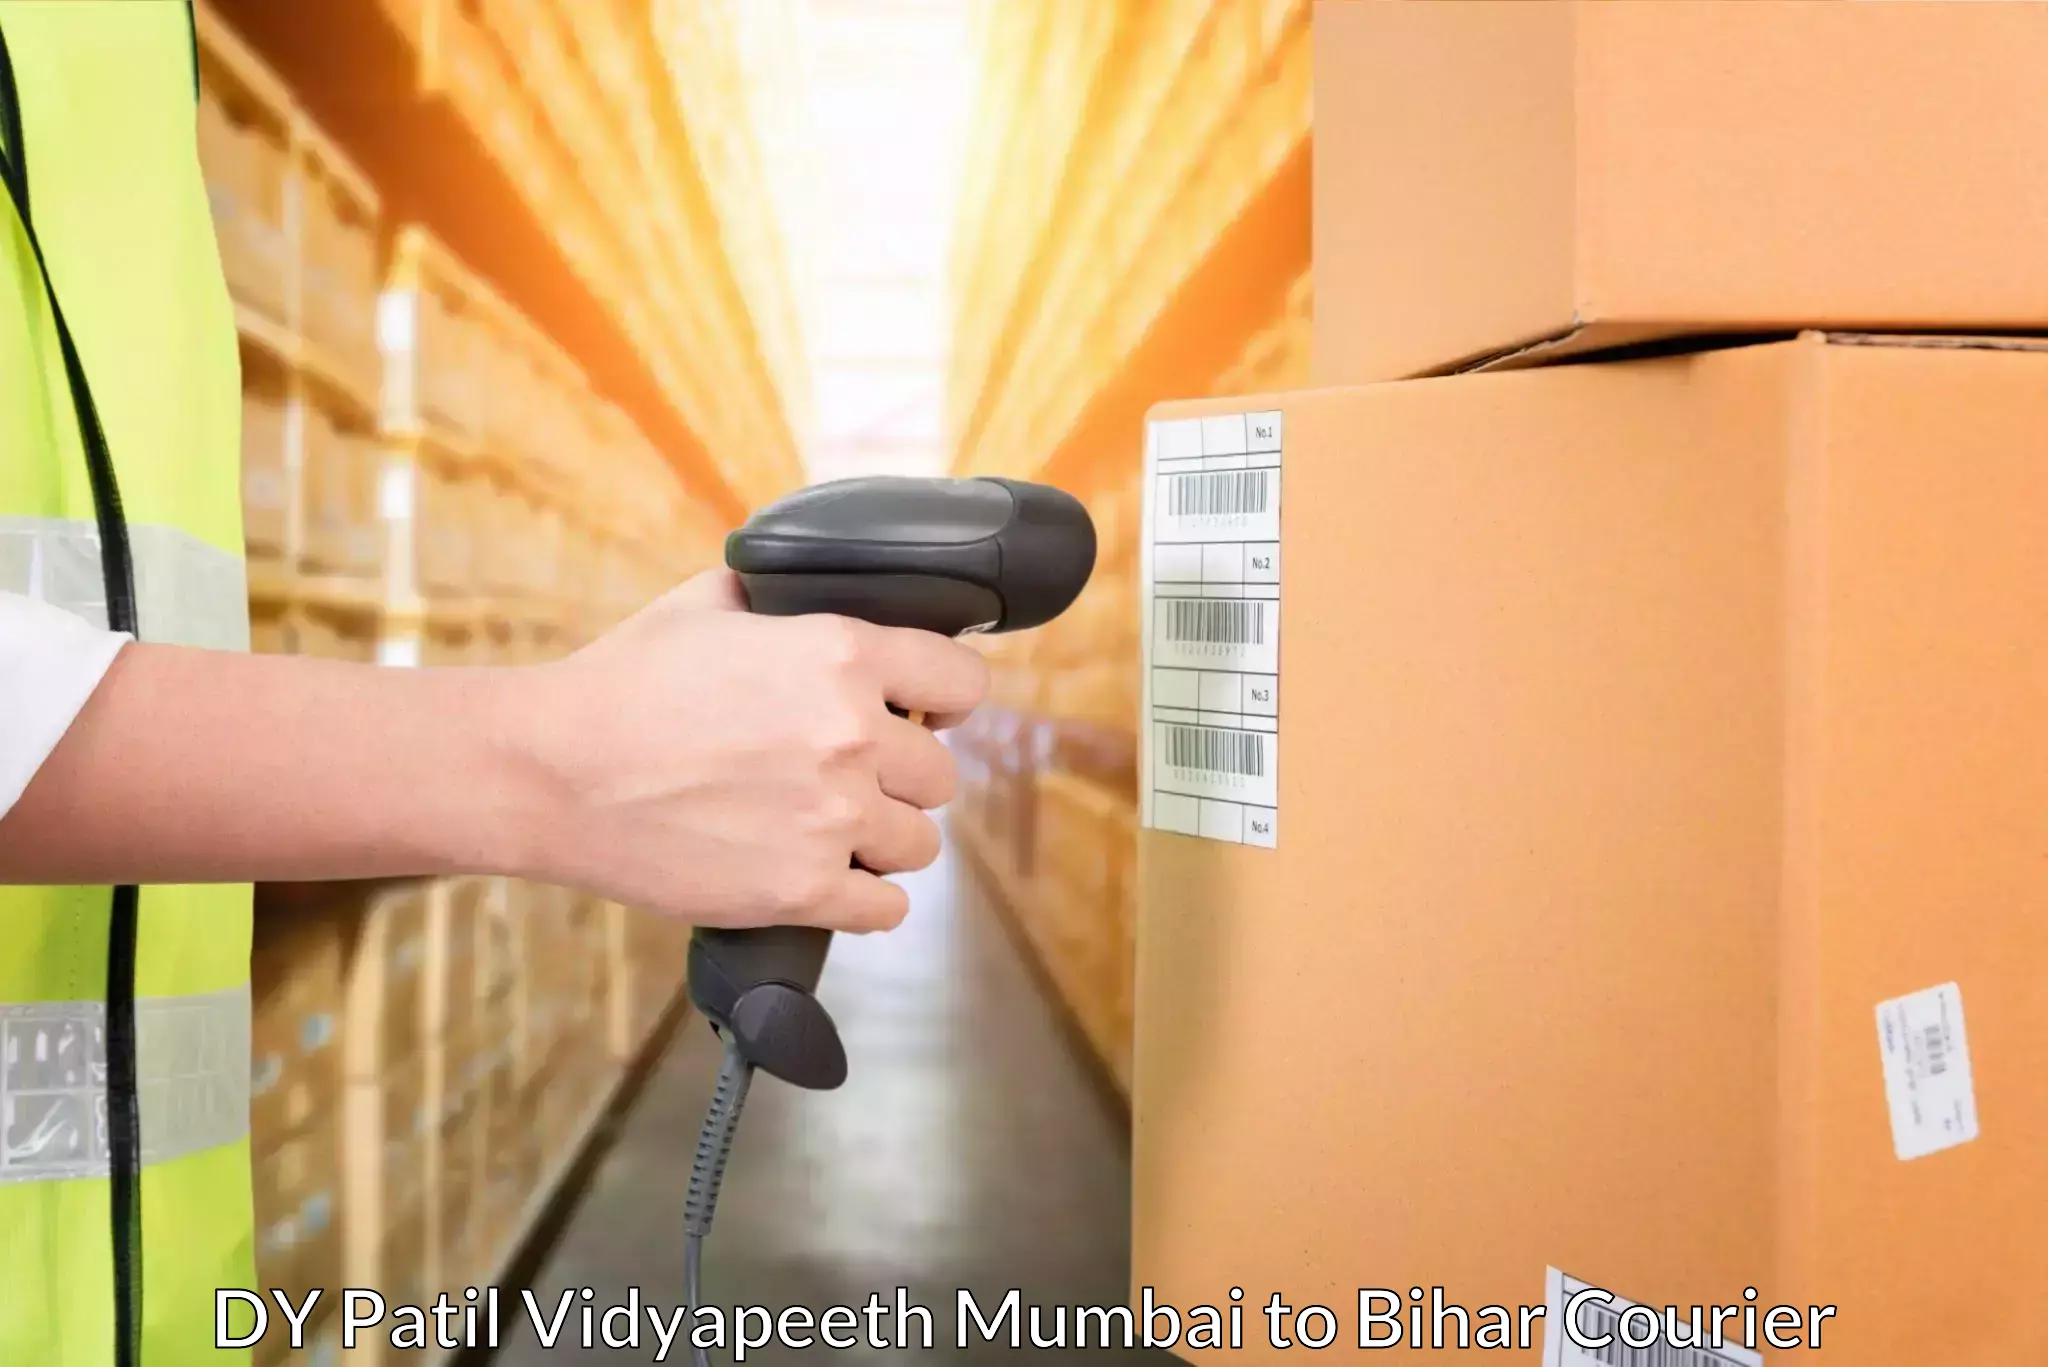 Overnight delivery services DY Patil Vidyapeeth Mumbai to Parsauni